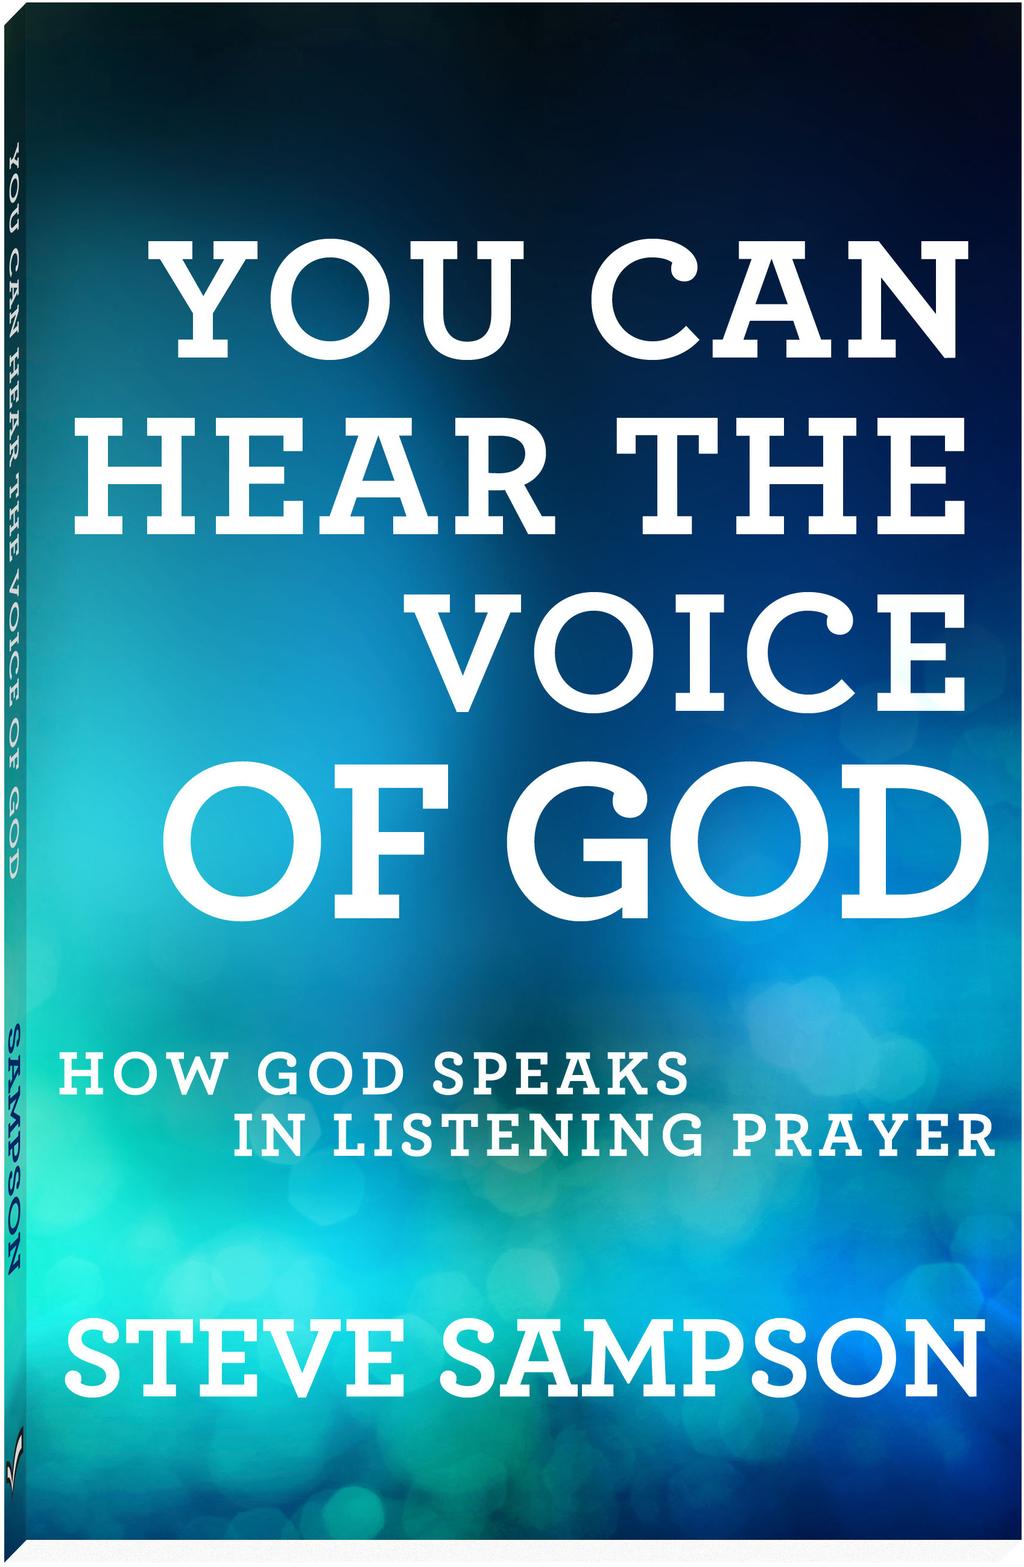 MARCH How God Speaks in Listening Prayer Classic, popular text on how to hear God now includes new stories and practical guidelines Uncomplicated,